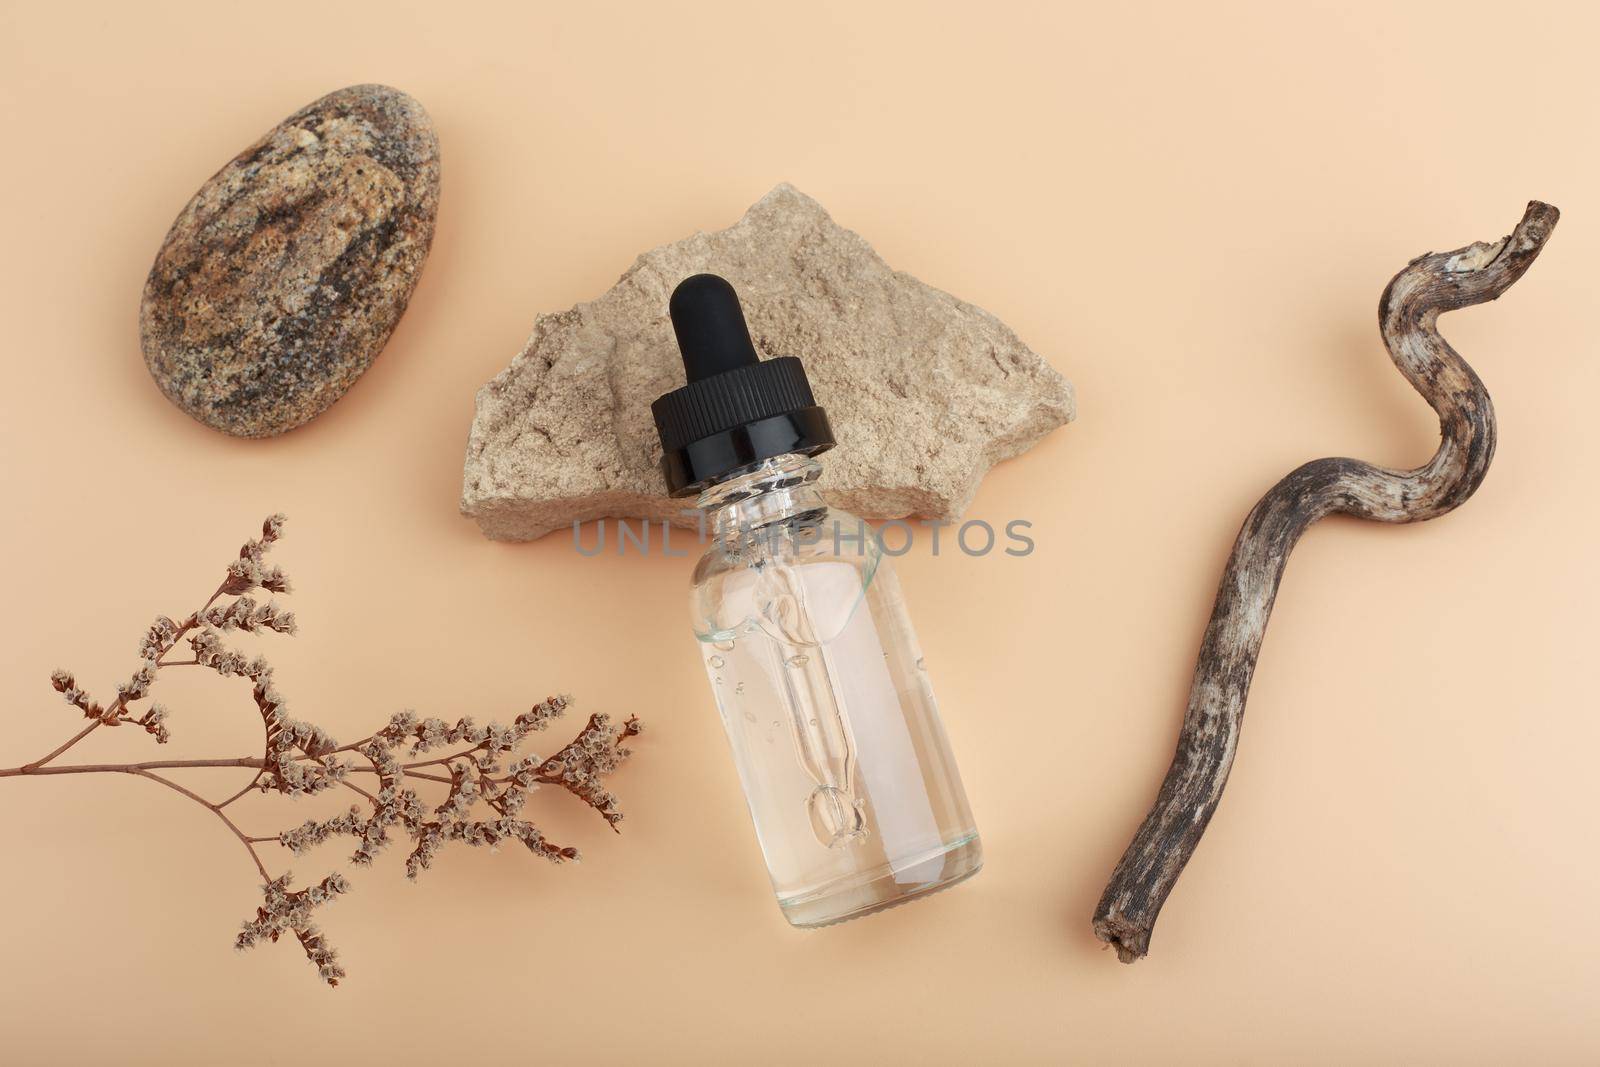 Selective focus, skin serum in transparent bottle with dry flower, stones and stick. Concept of organic beauty products by Senorina_Irina